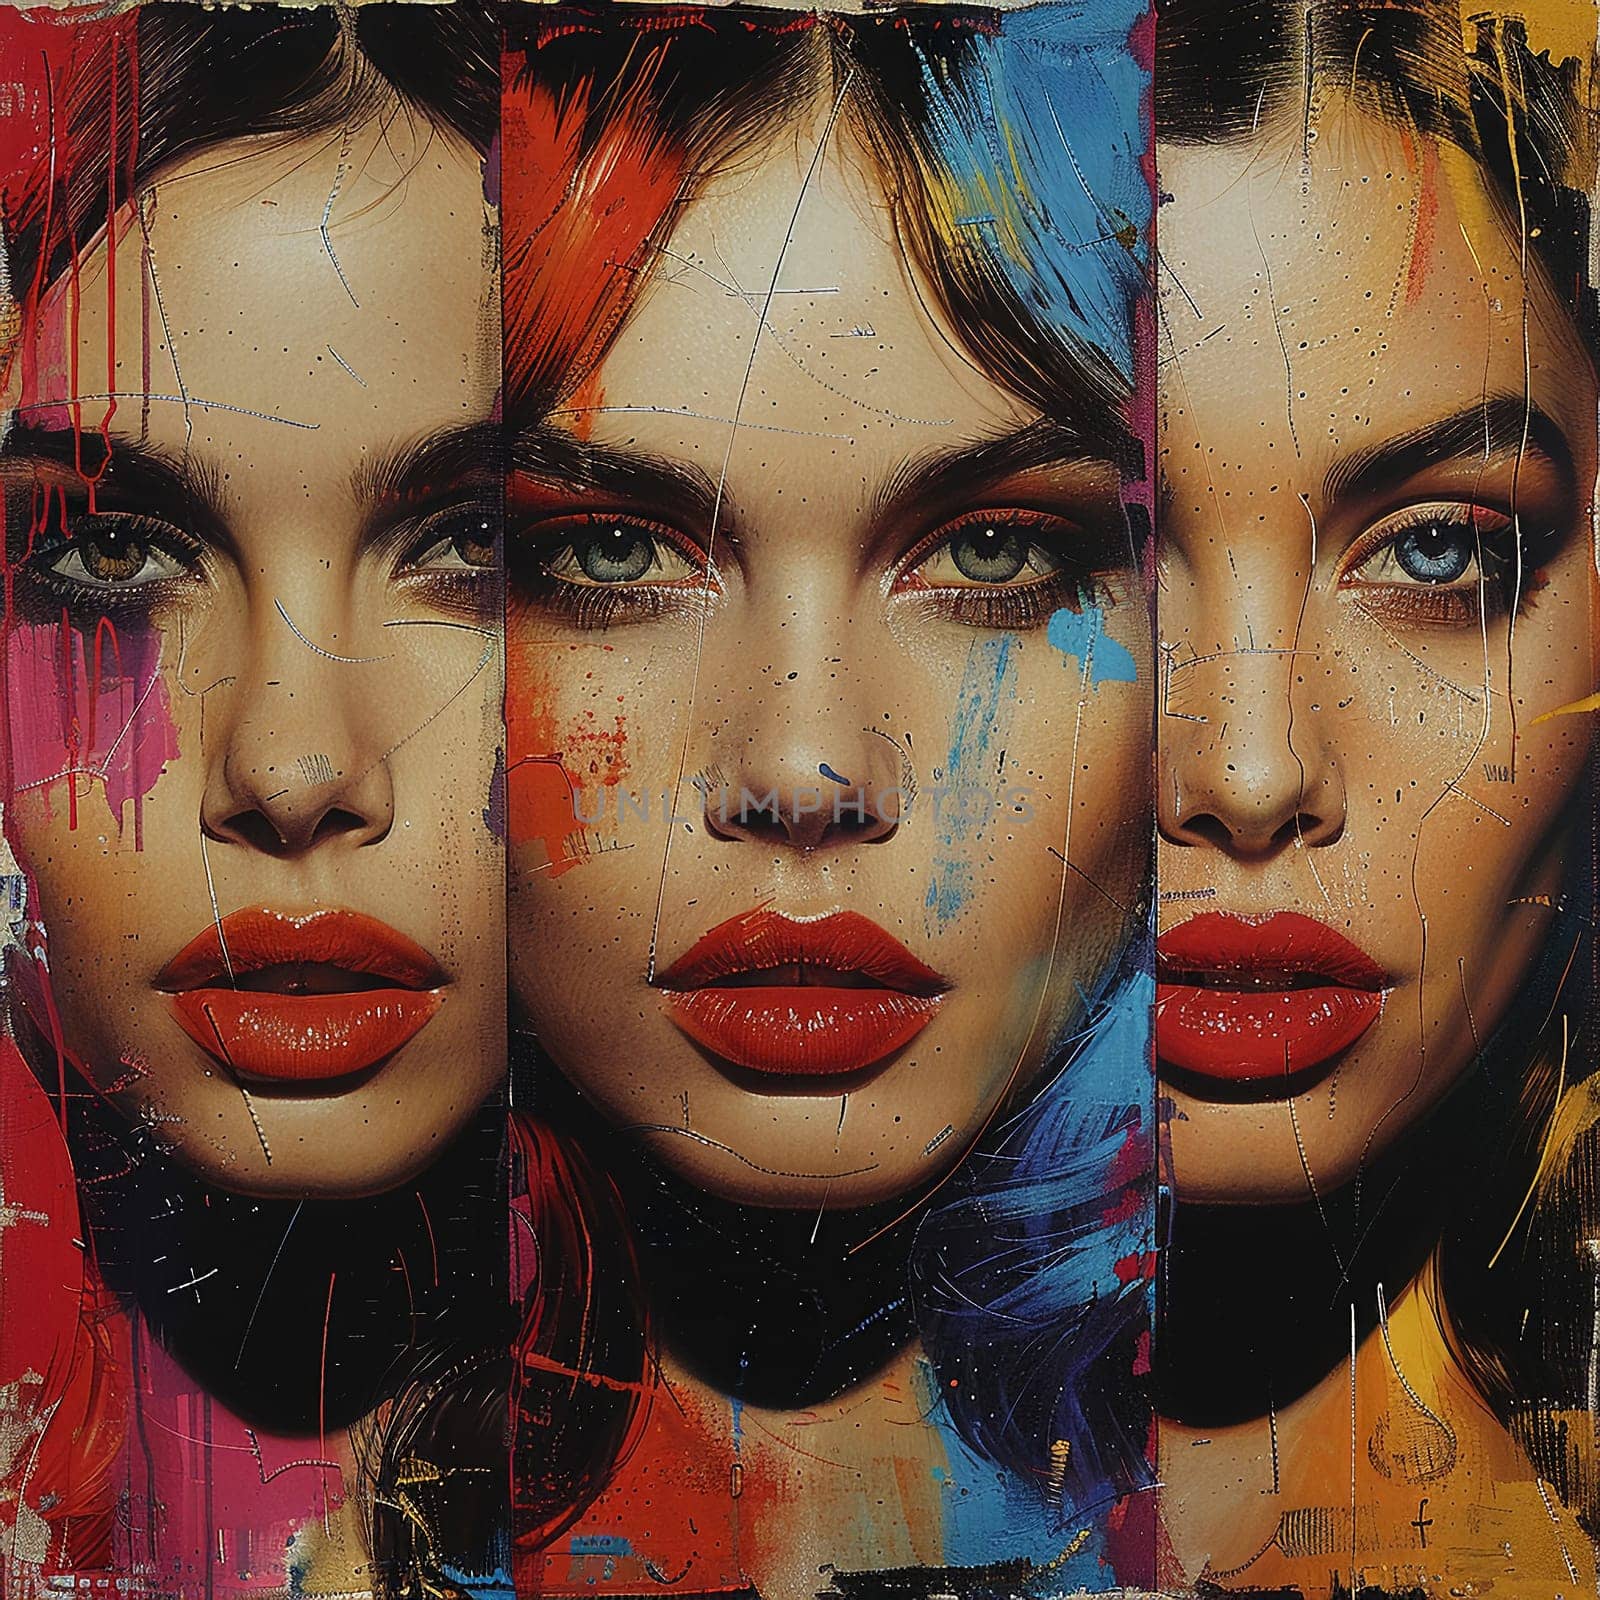 Modern pop art piece featuring iconic female figures for Women's Day.